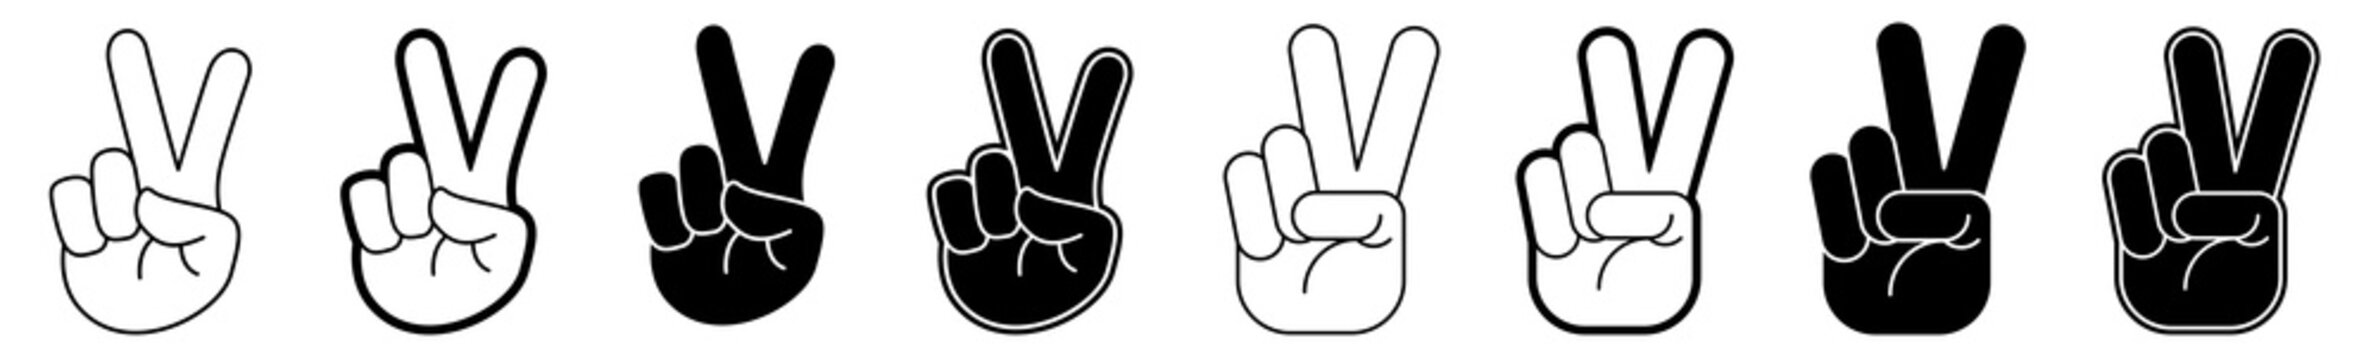 Peace Sign Icon Peace Sign Victory Hand Set | Peace Signs Symbol Vector Illustration Logo | Peace Sign V Peace Sign Fingers Isolated Collection